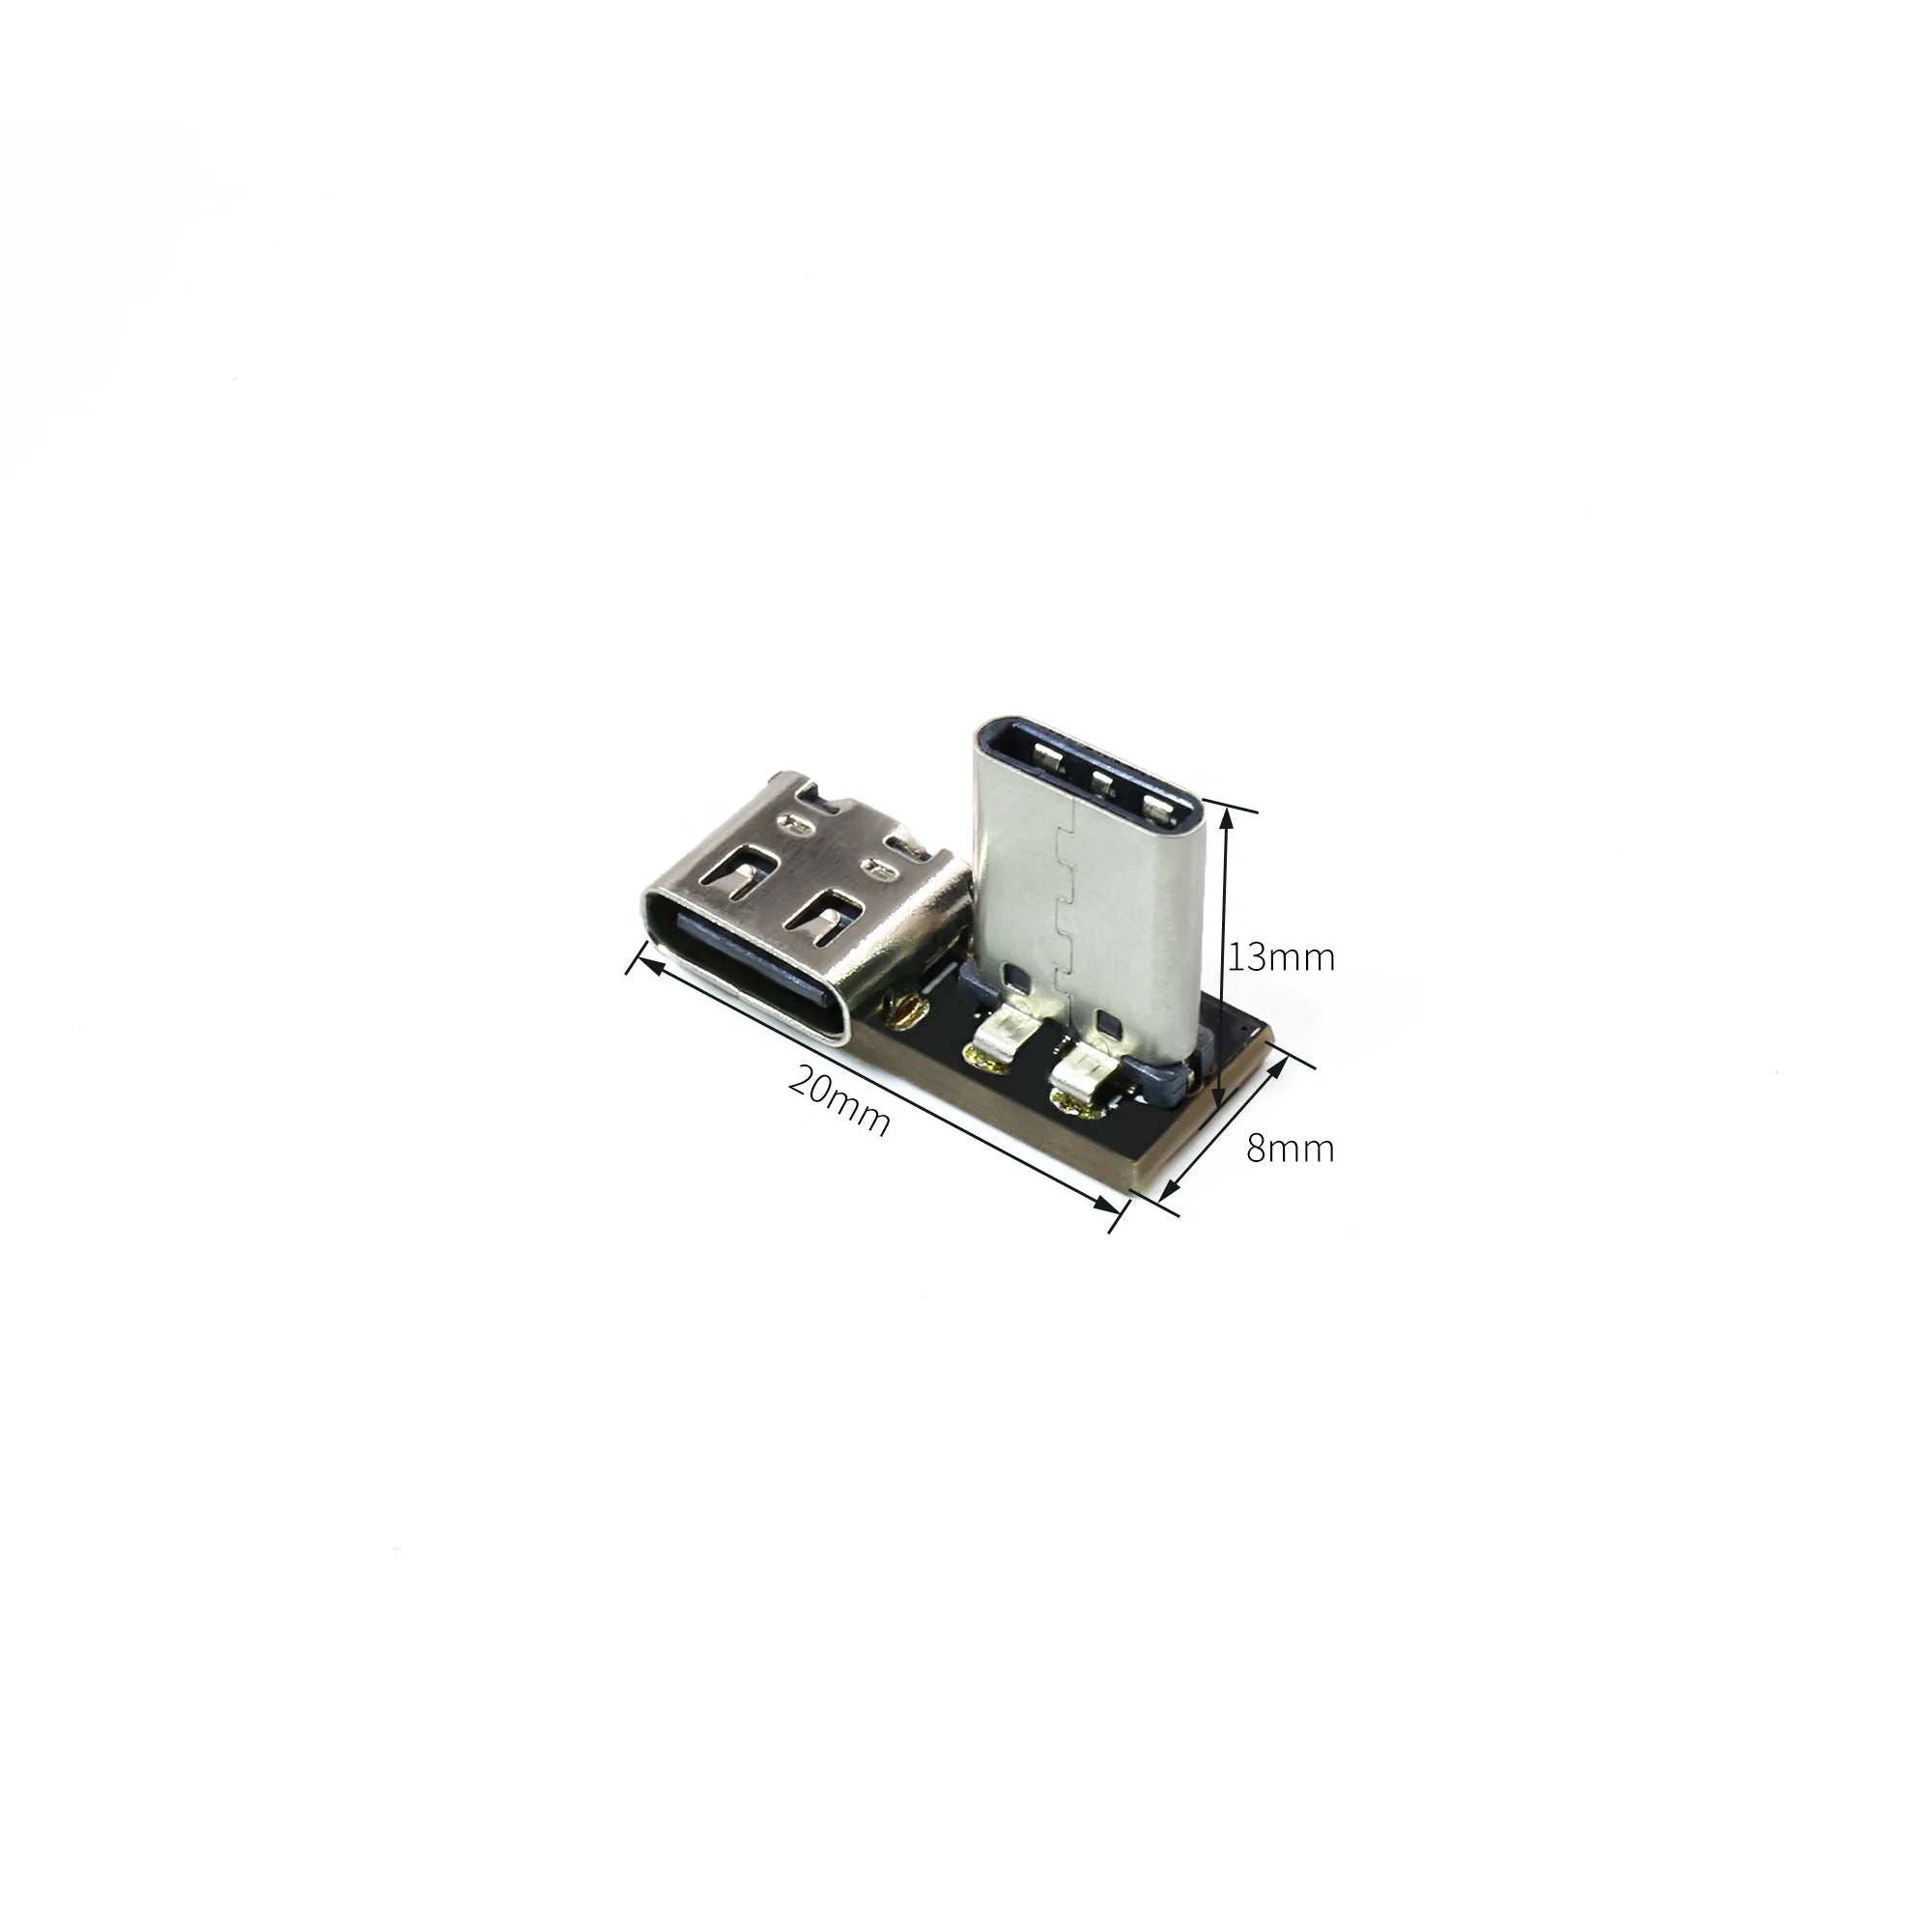 Package Included: 1x Type C USB Adapter Board .